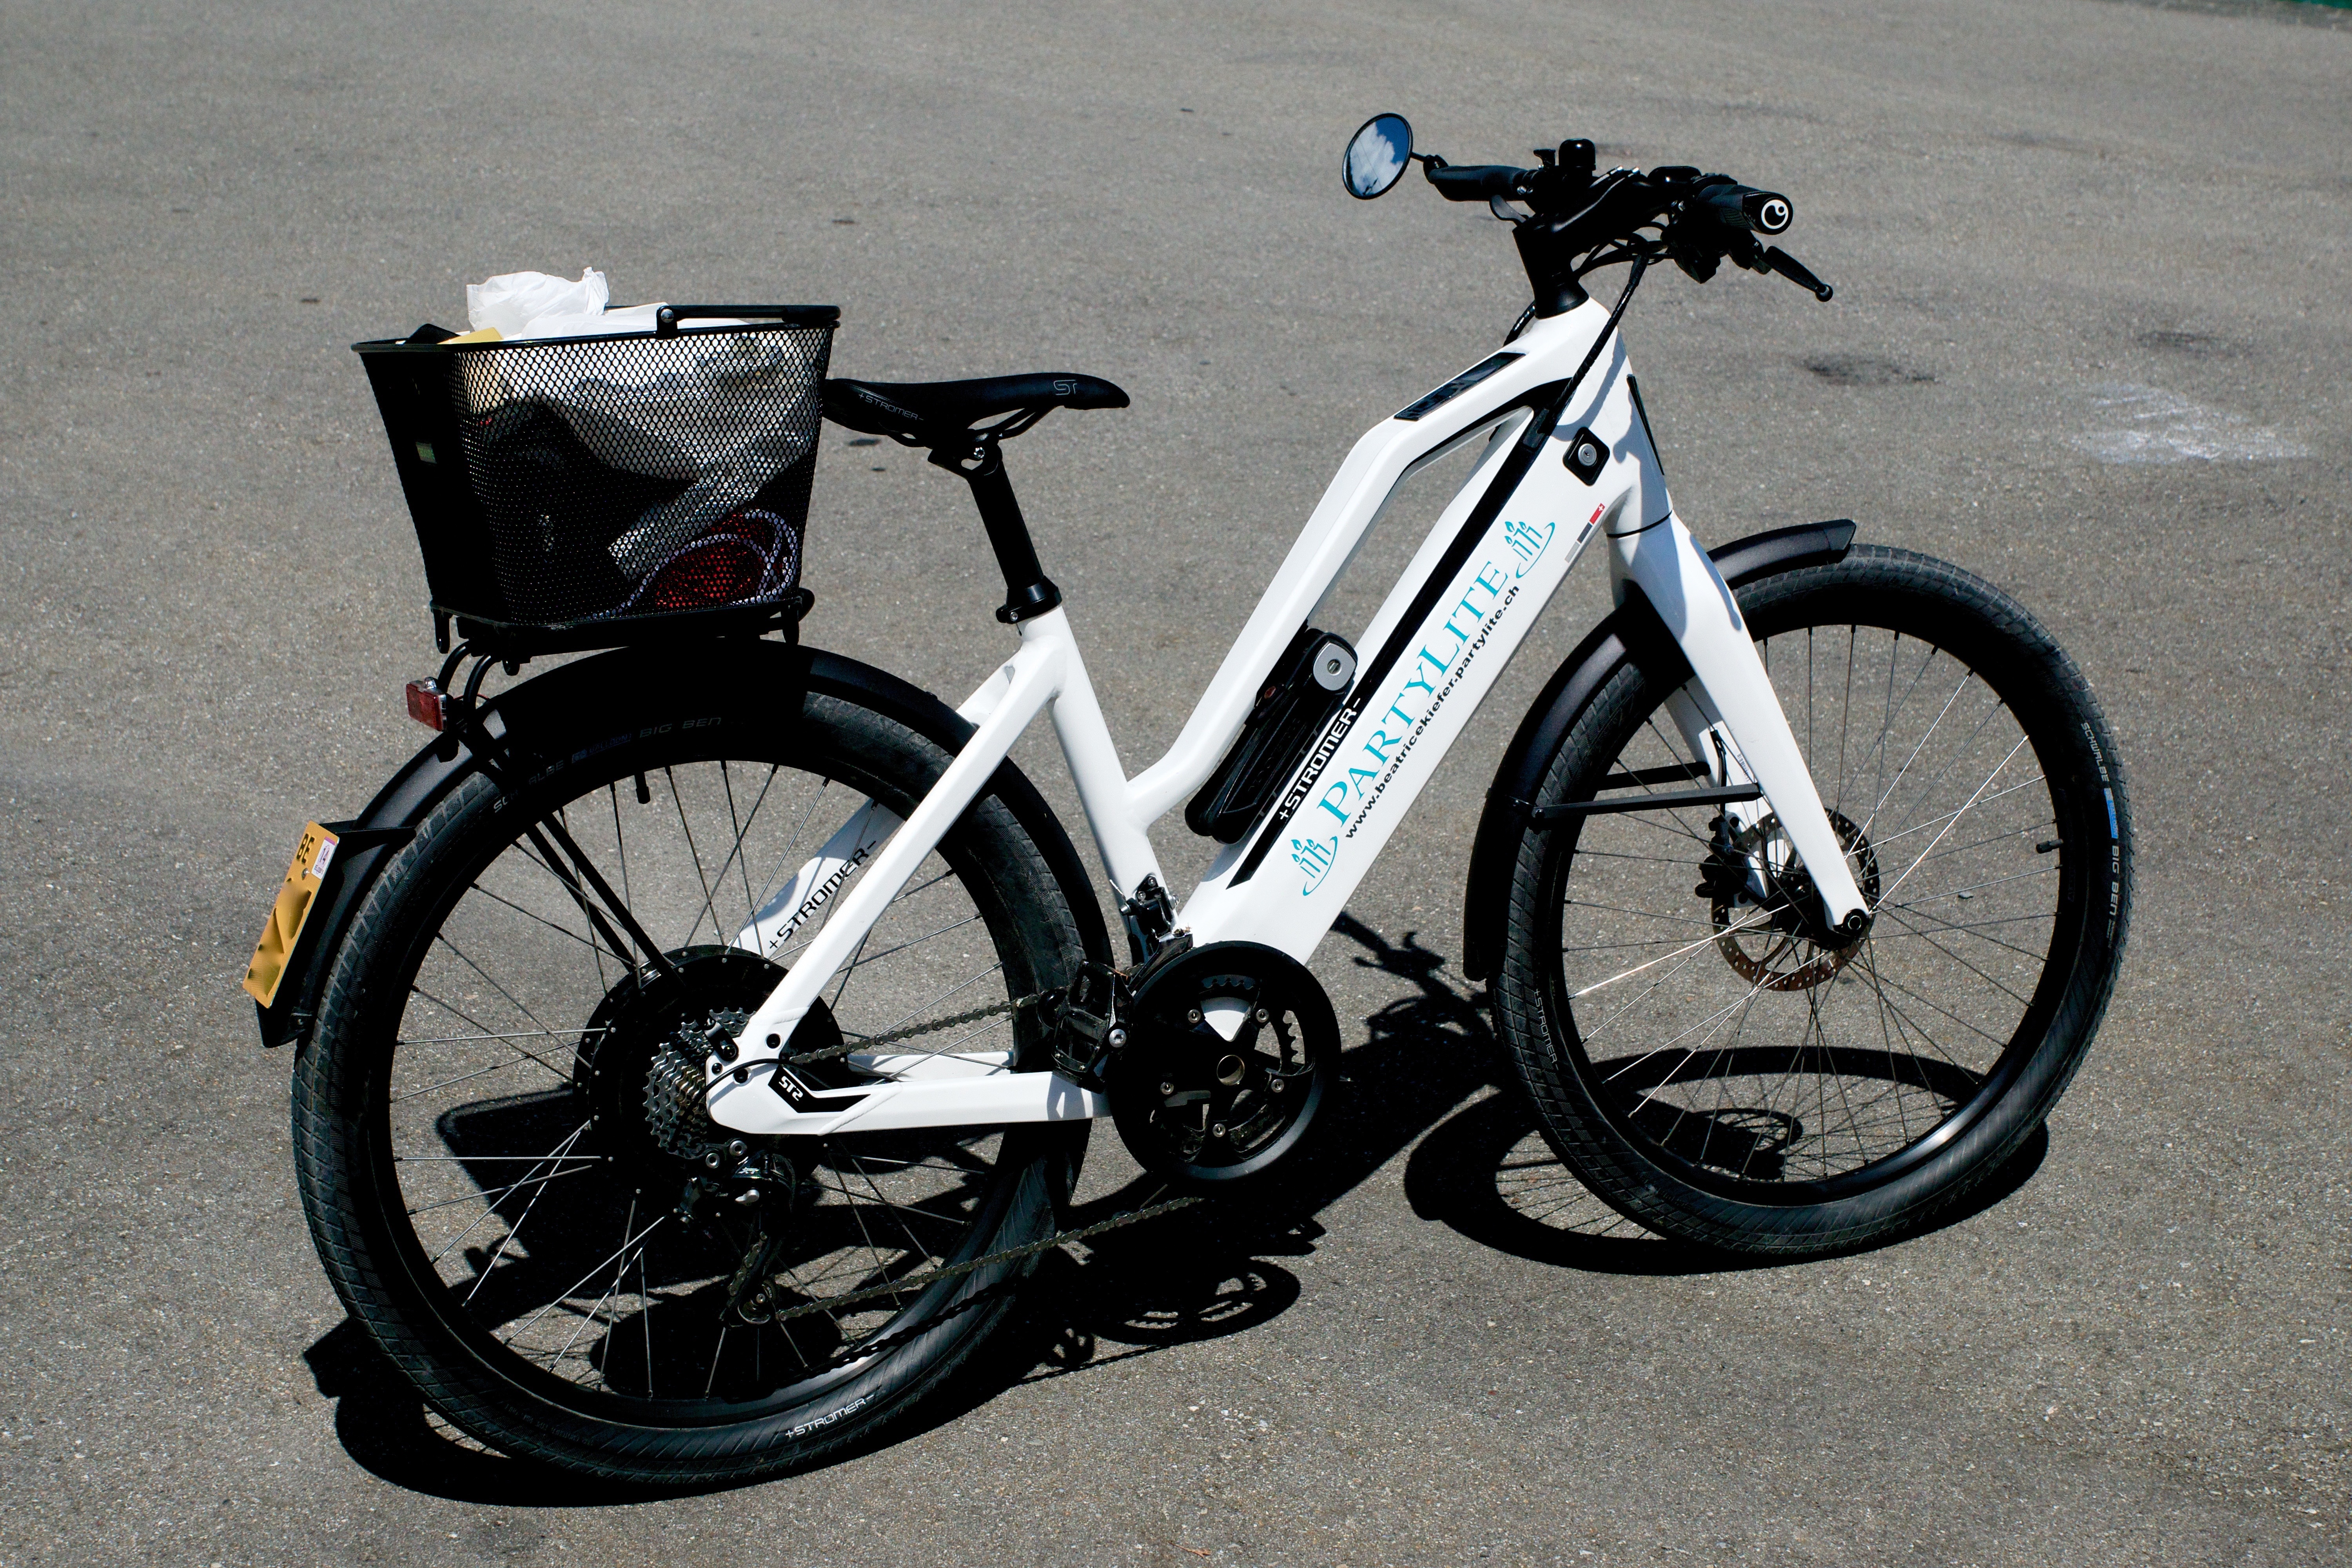 Electric Bikes Come with a Price